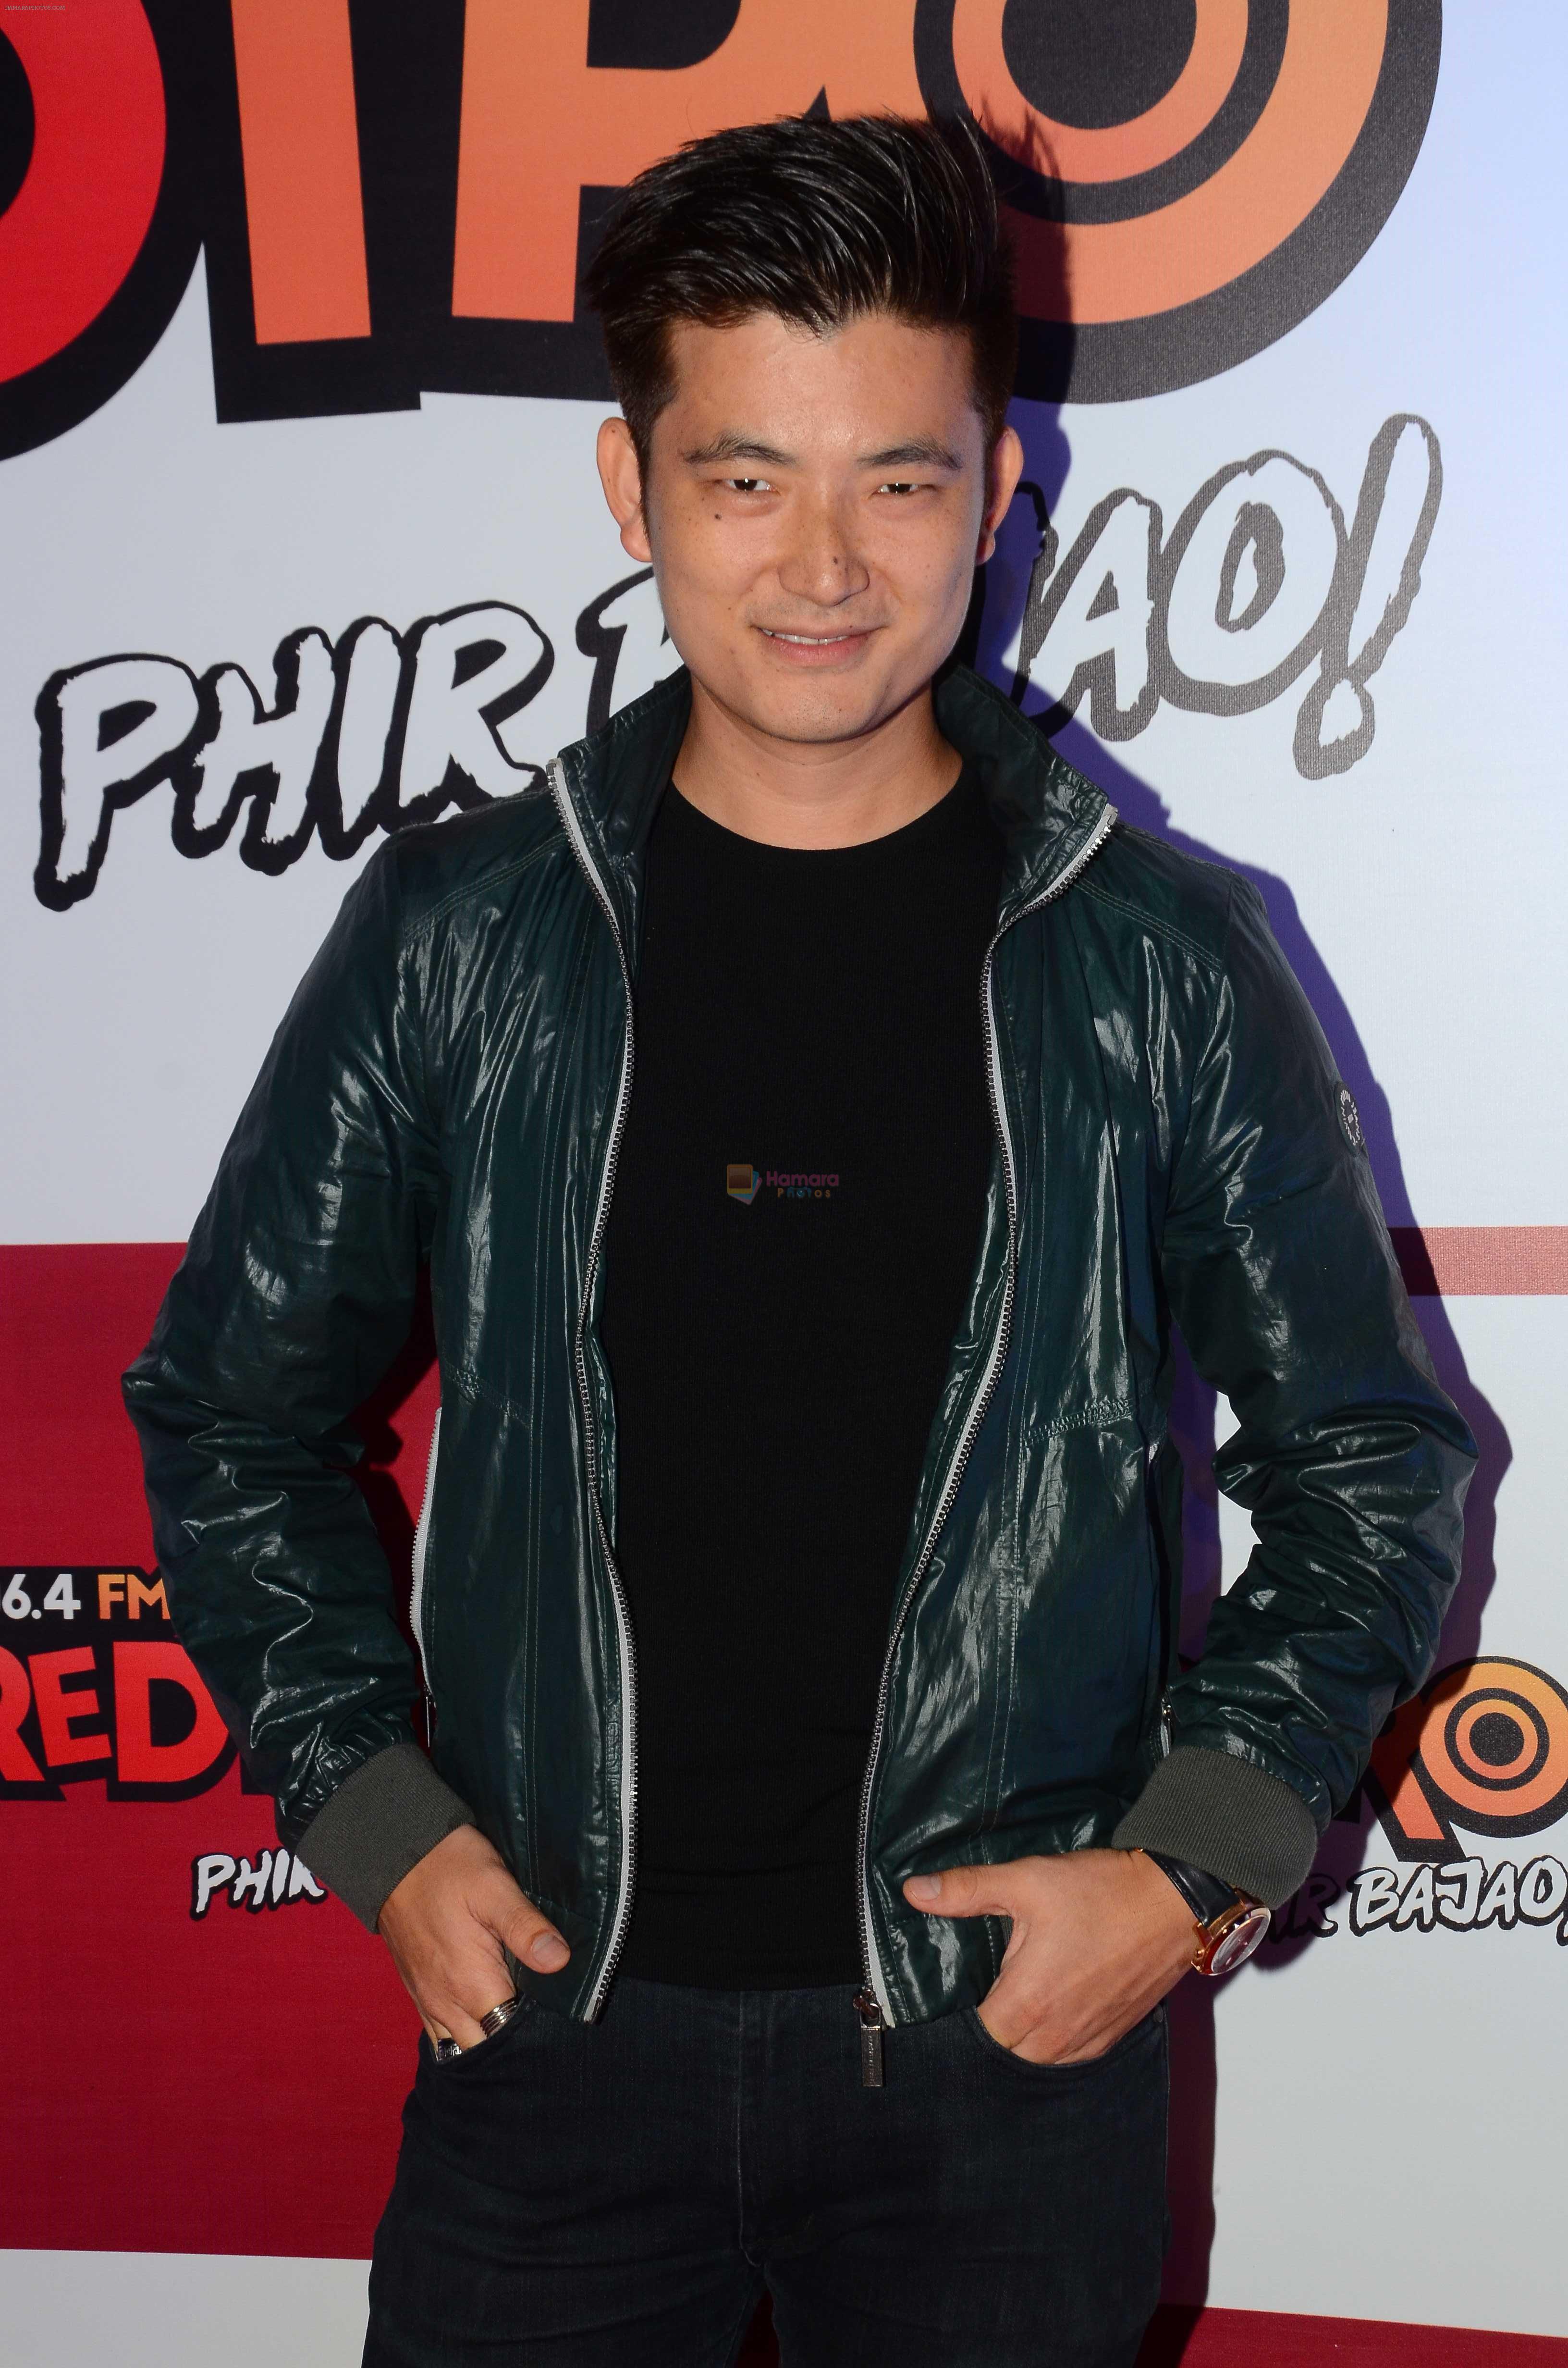 Meiyang Chang during the party organised by Red FM to celebrate the launch of its new radio station Redtro 106.4 in Mumbai India on 22 July 2016